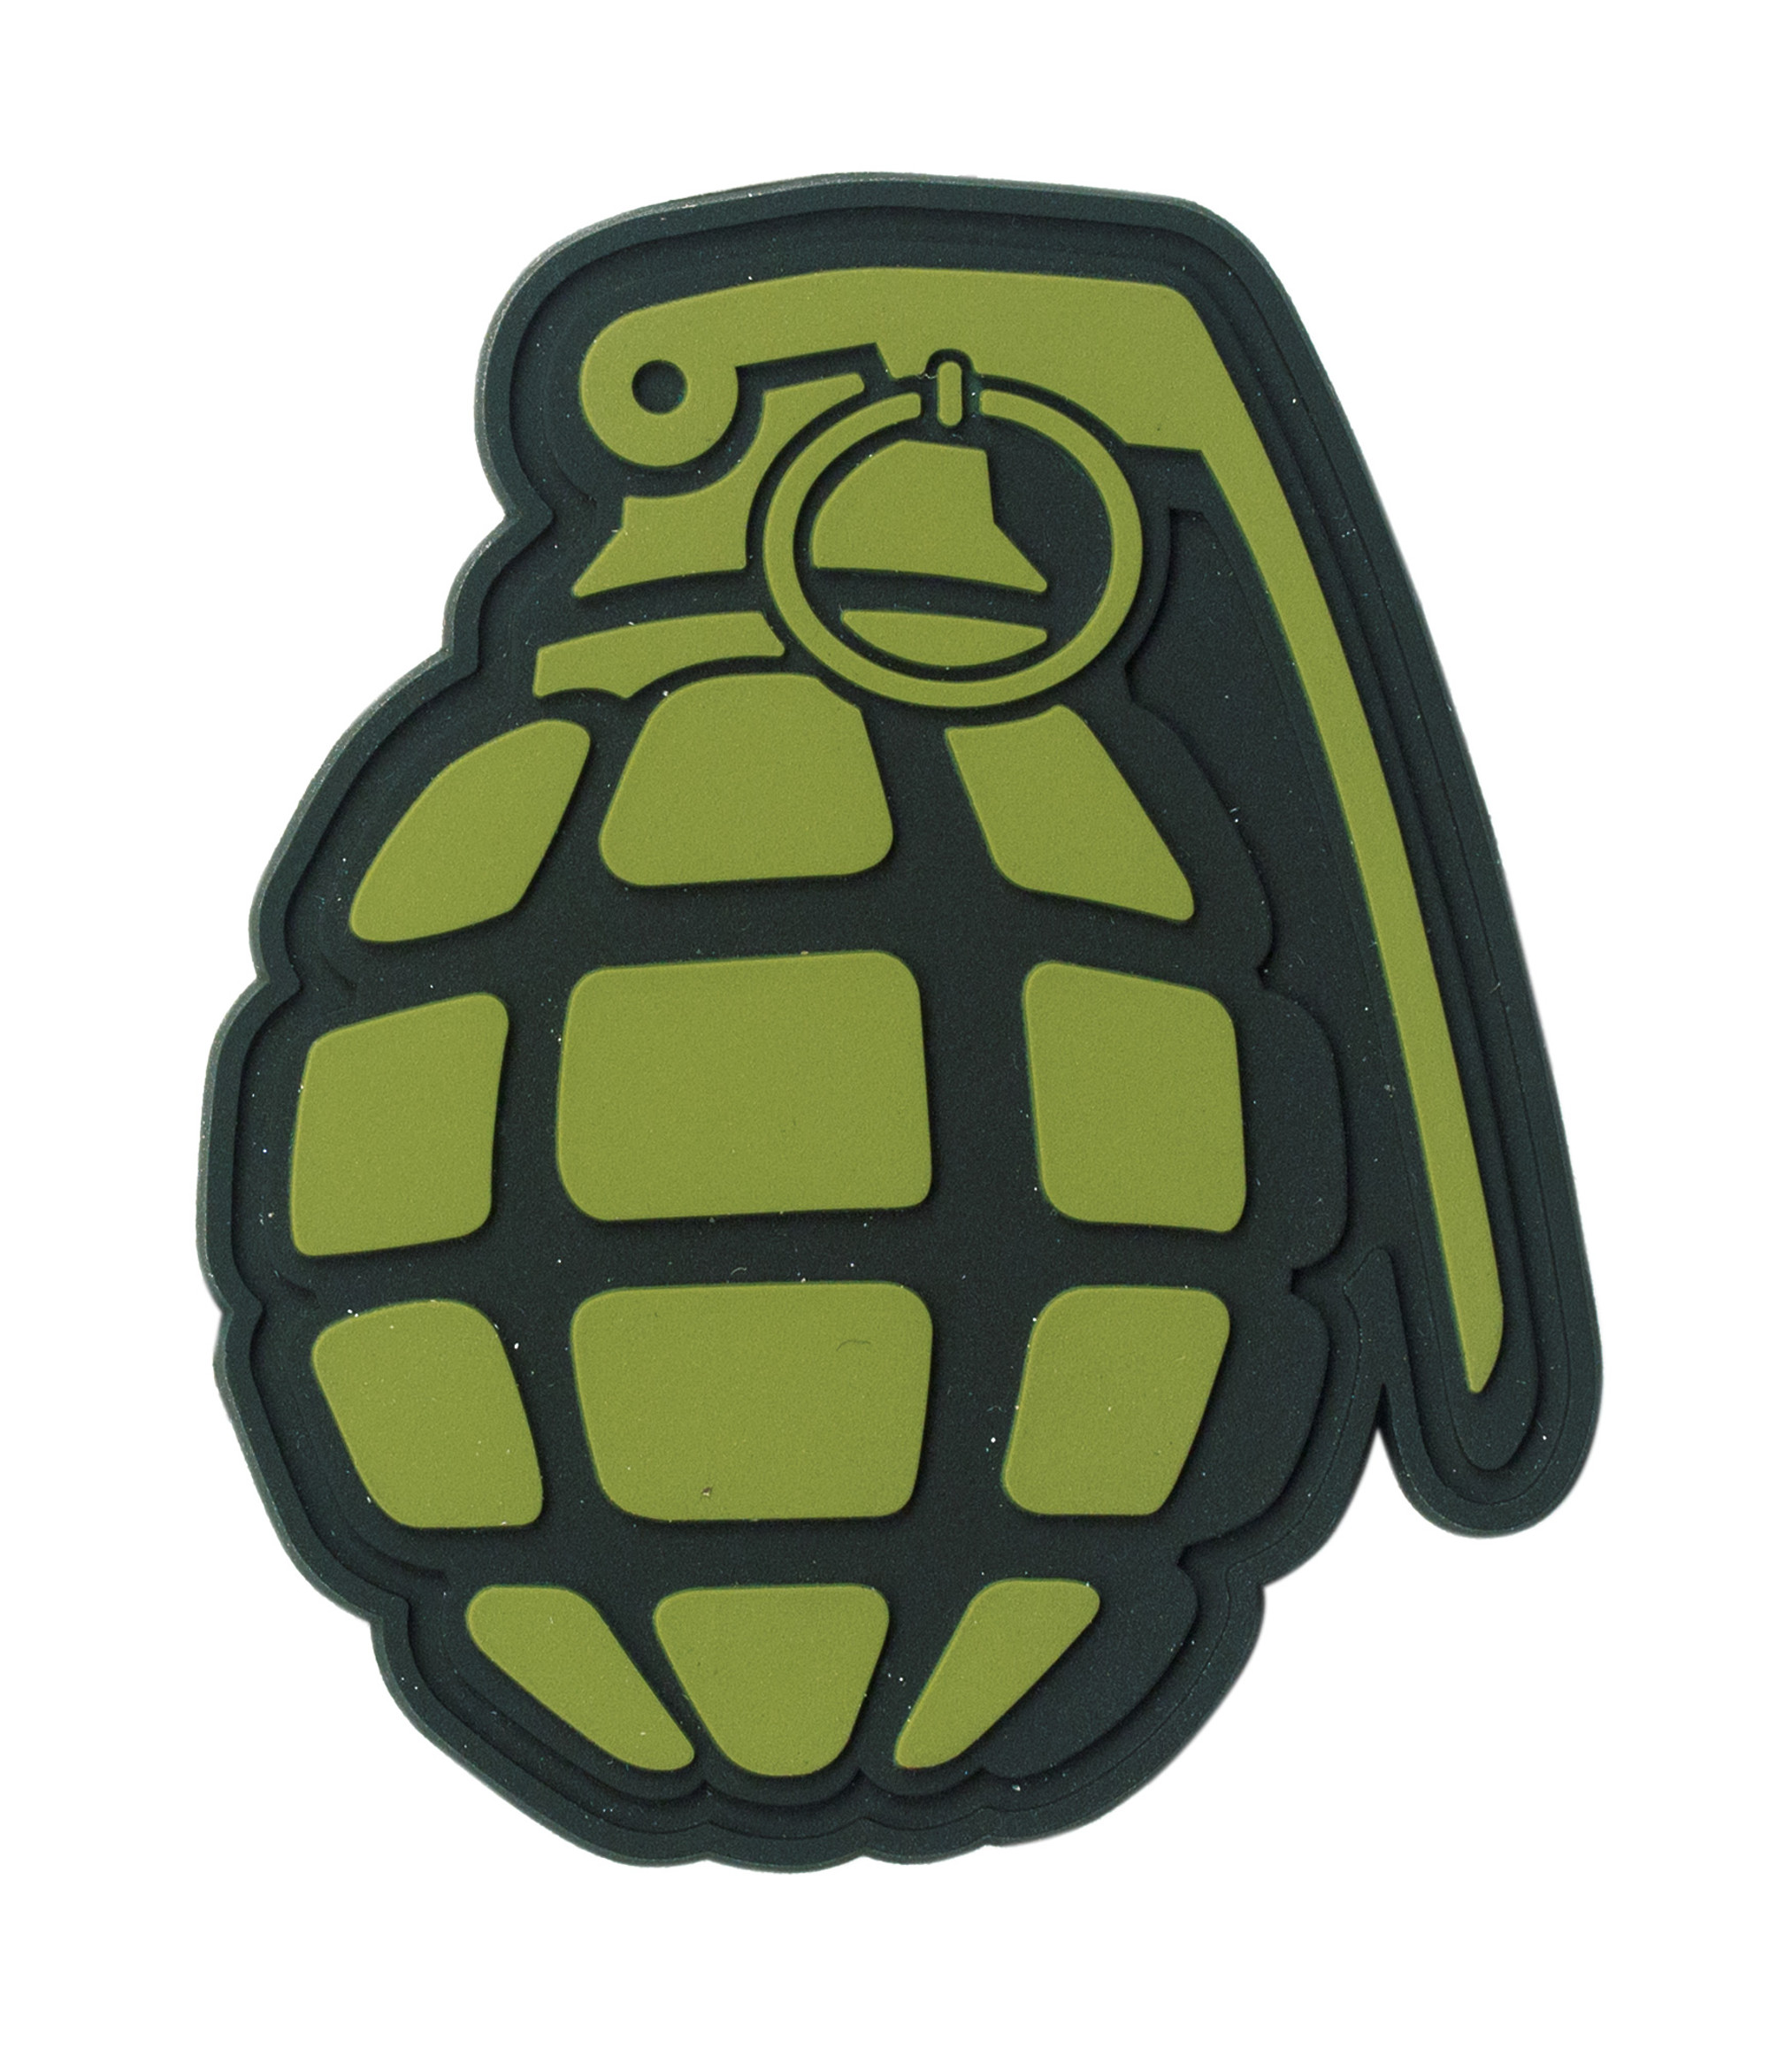 Rubber Patch - Grenade